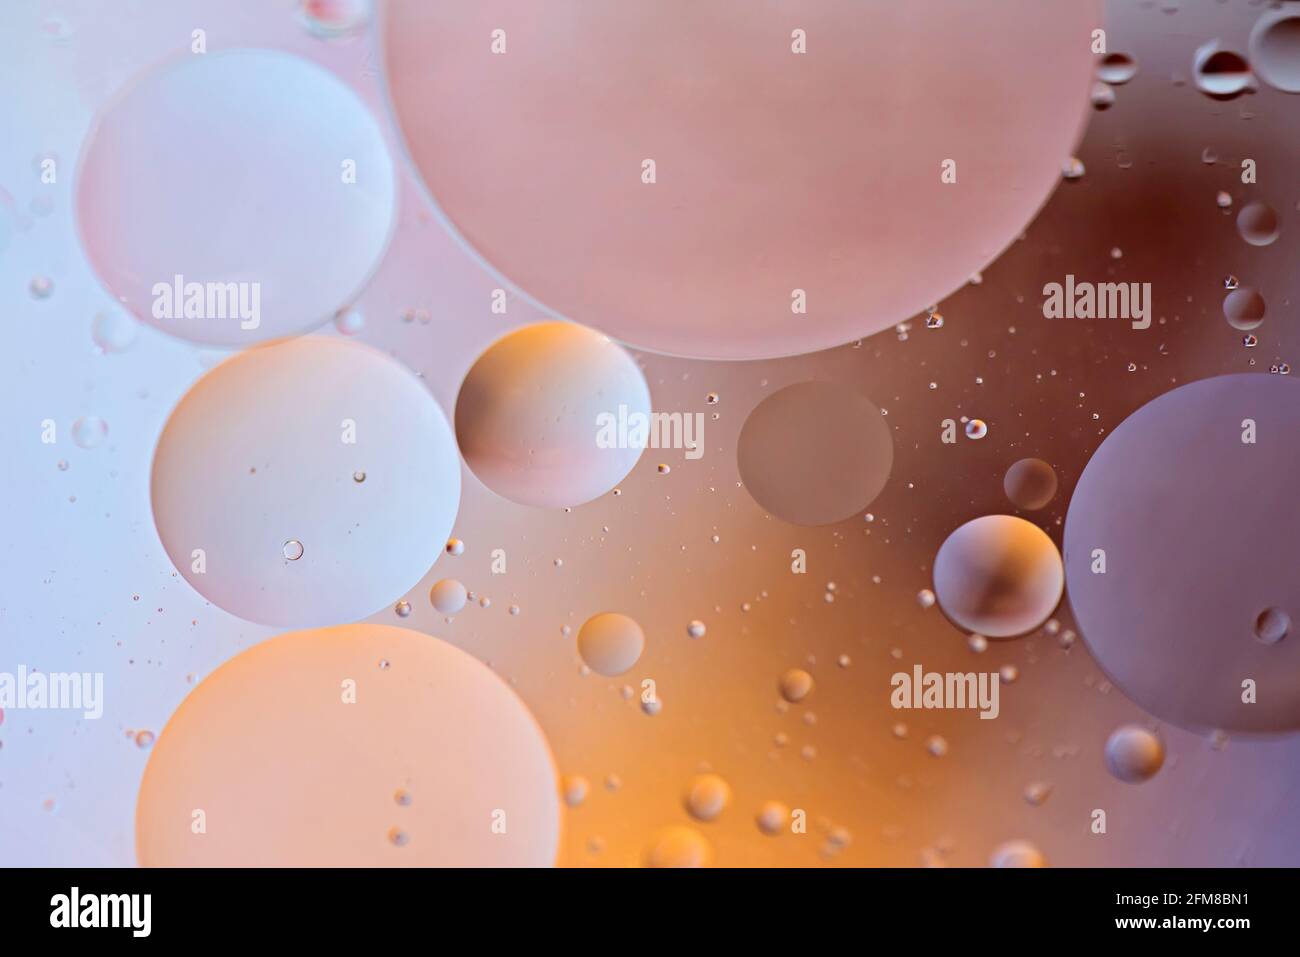 Colorful abstract background with oil drops on water Stock Photo